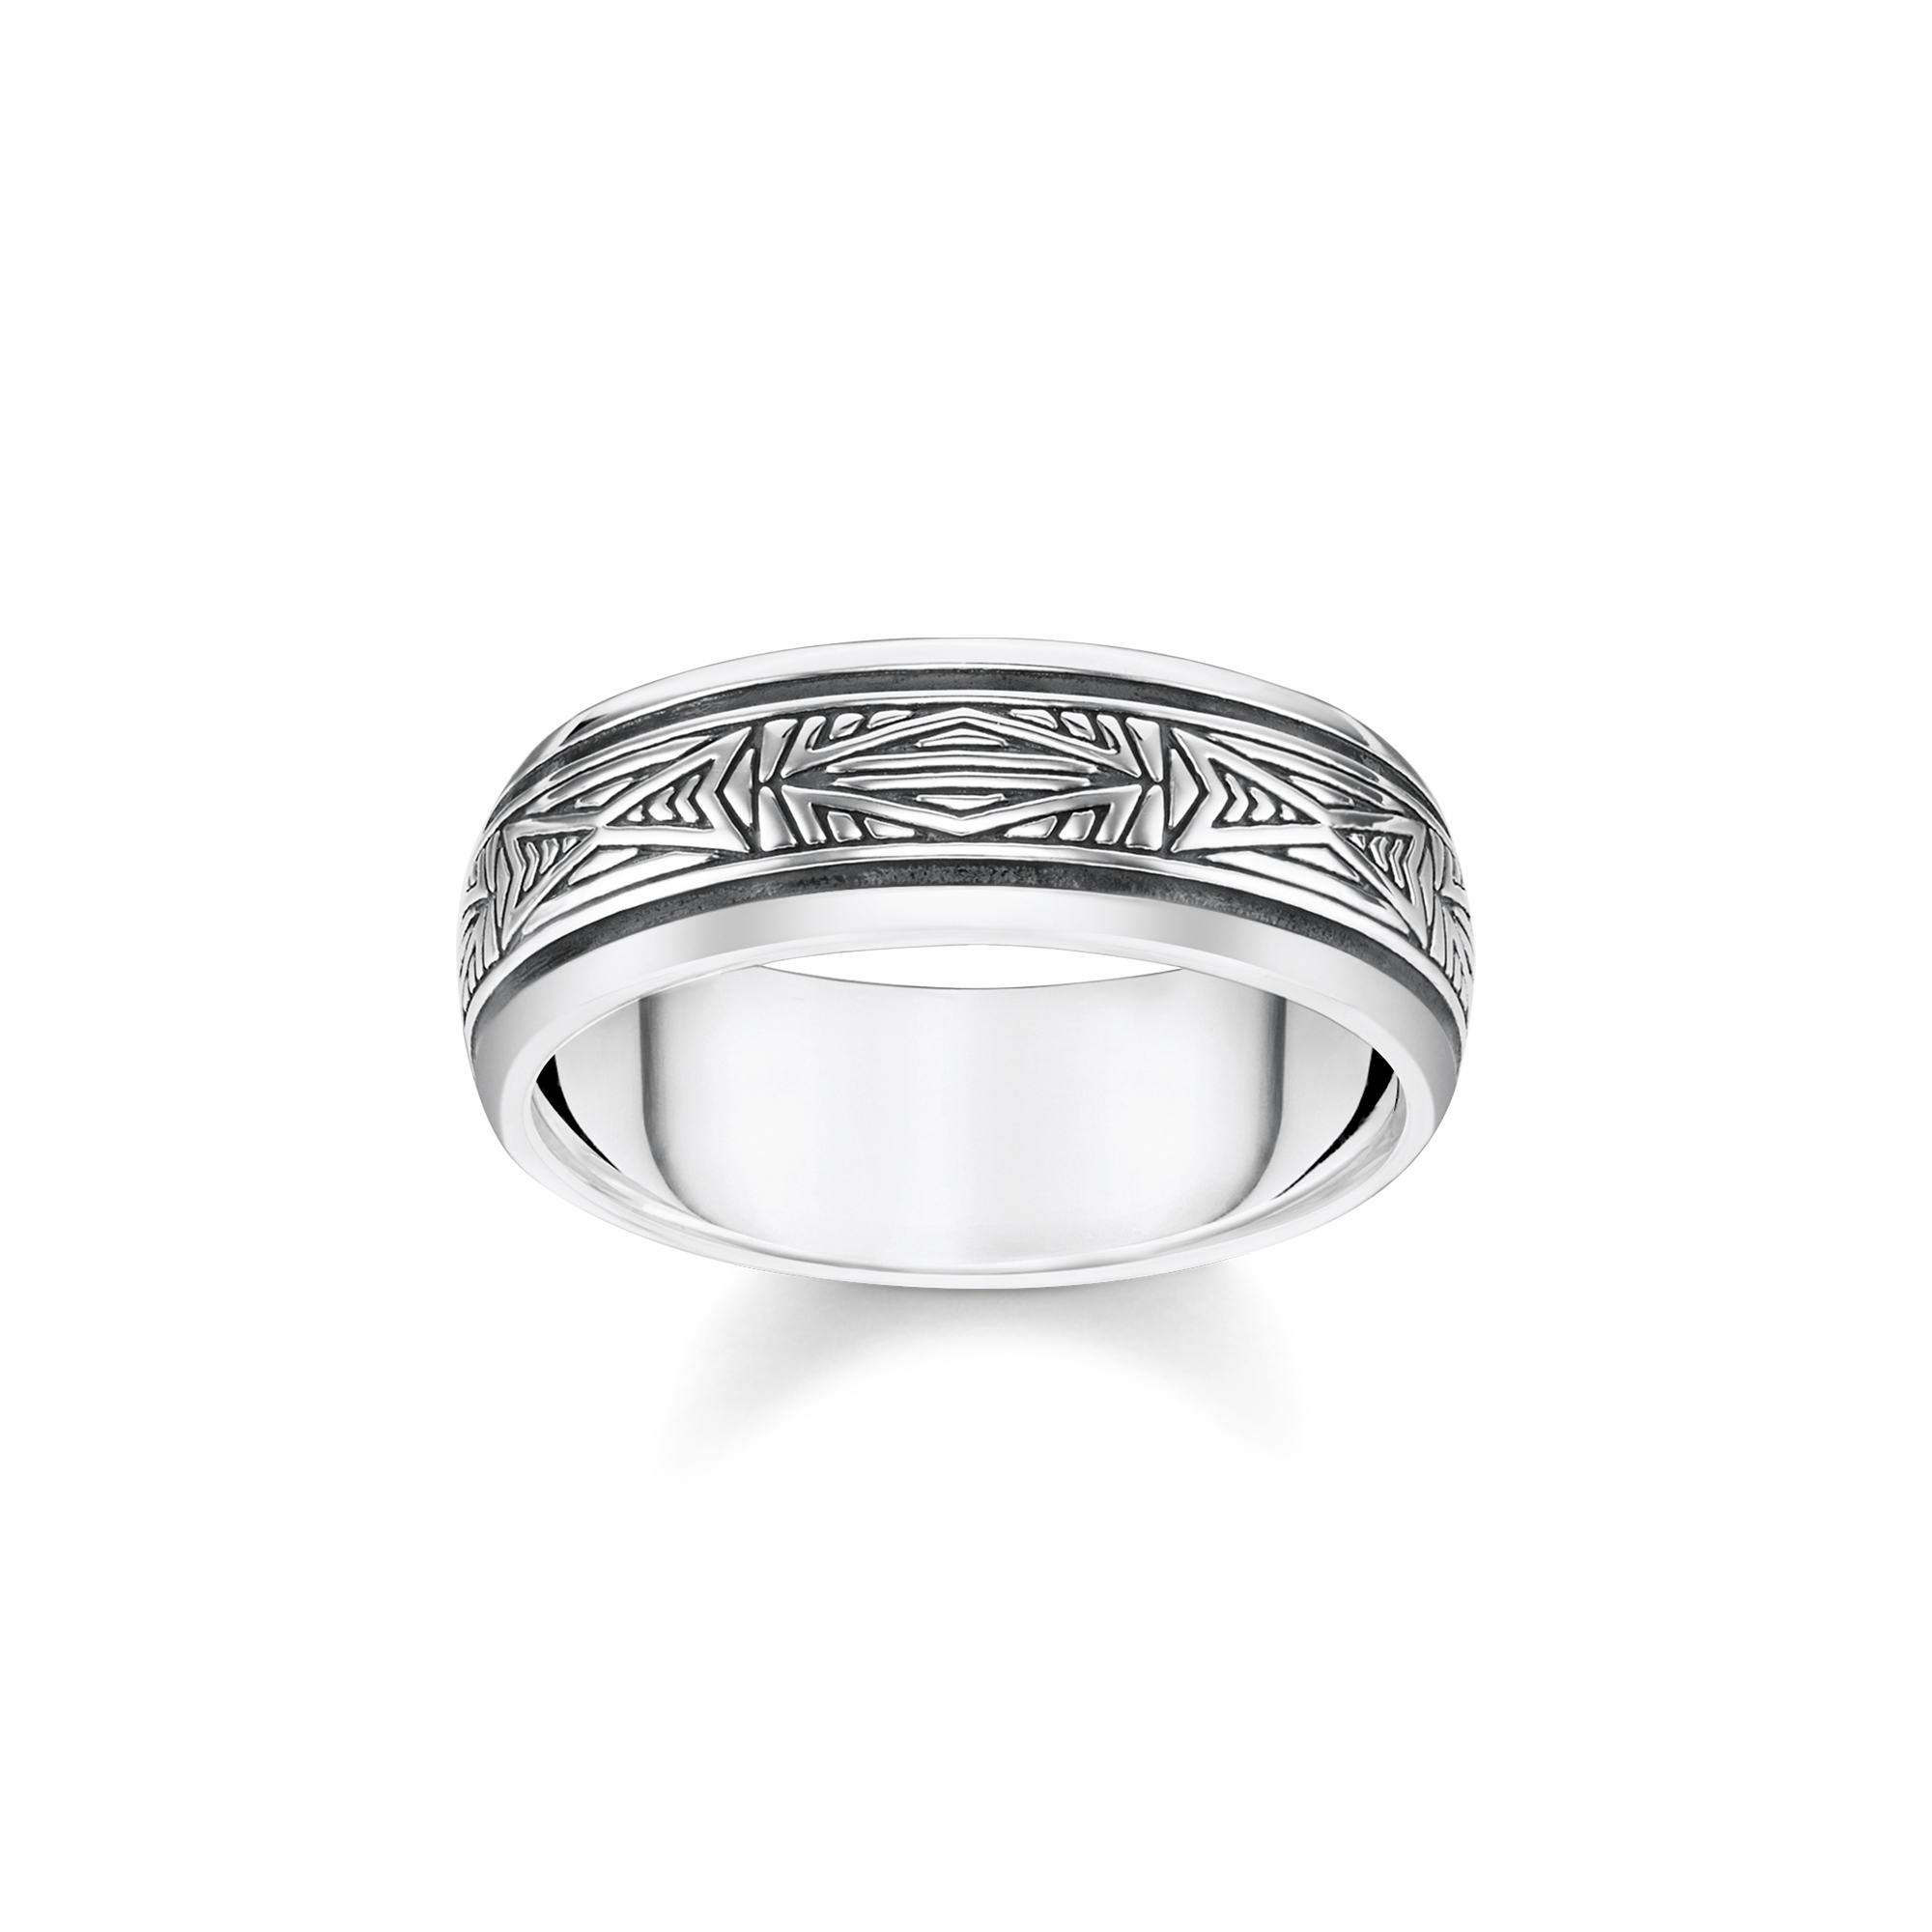 Thomas Sabo Rebel At Heart Blackened Sterling-silver Band Ring in Metallic for Men Mens Jewellery Rings 